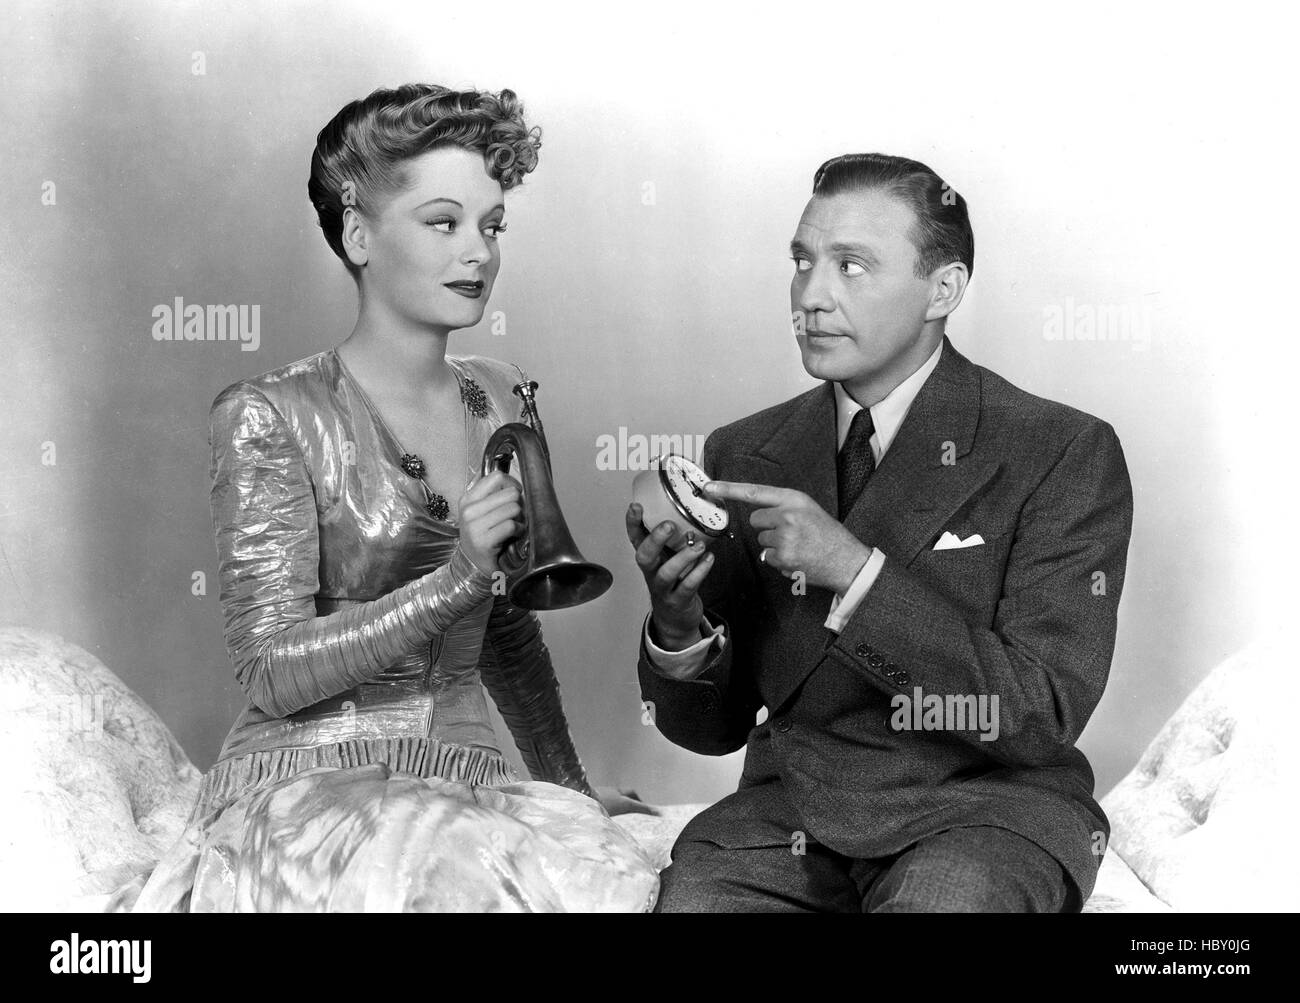 THE HORN BLOWS AT MIDNIGHT, Alexis Smith, Jack Benny, 1945 Stock Photo -  Alamy